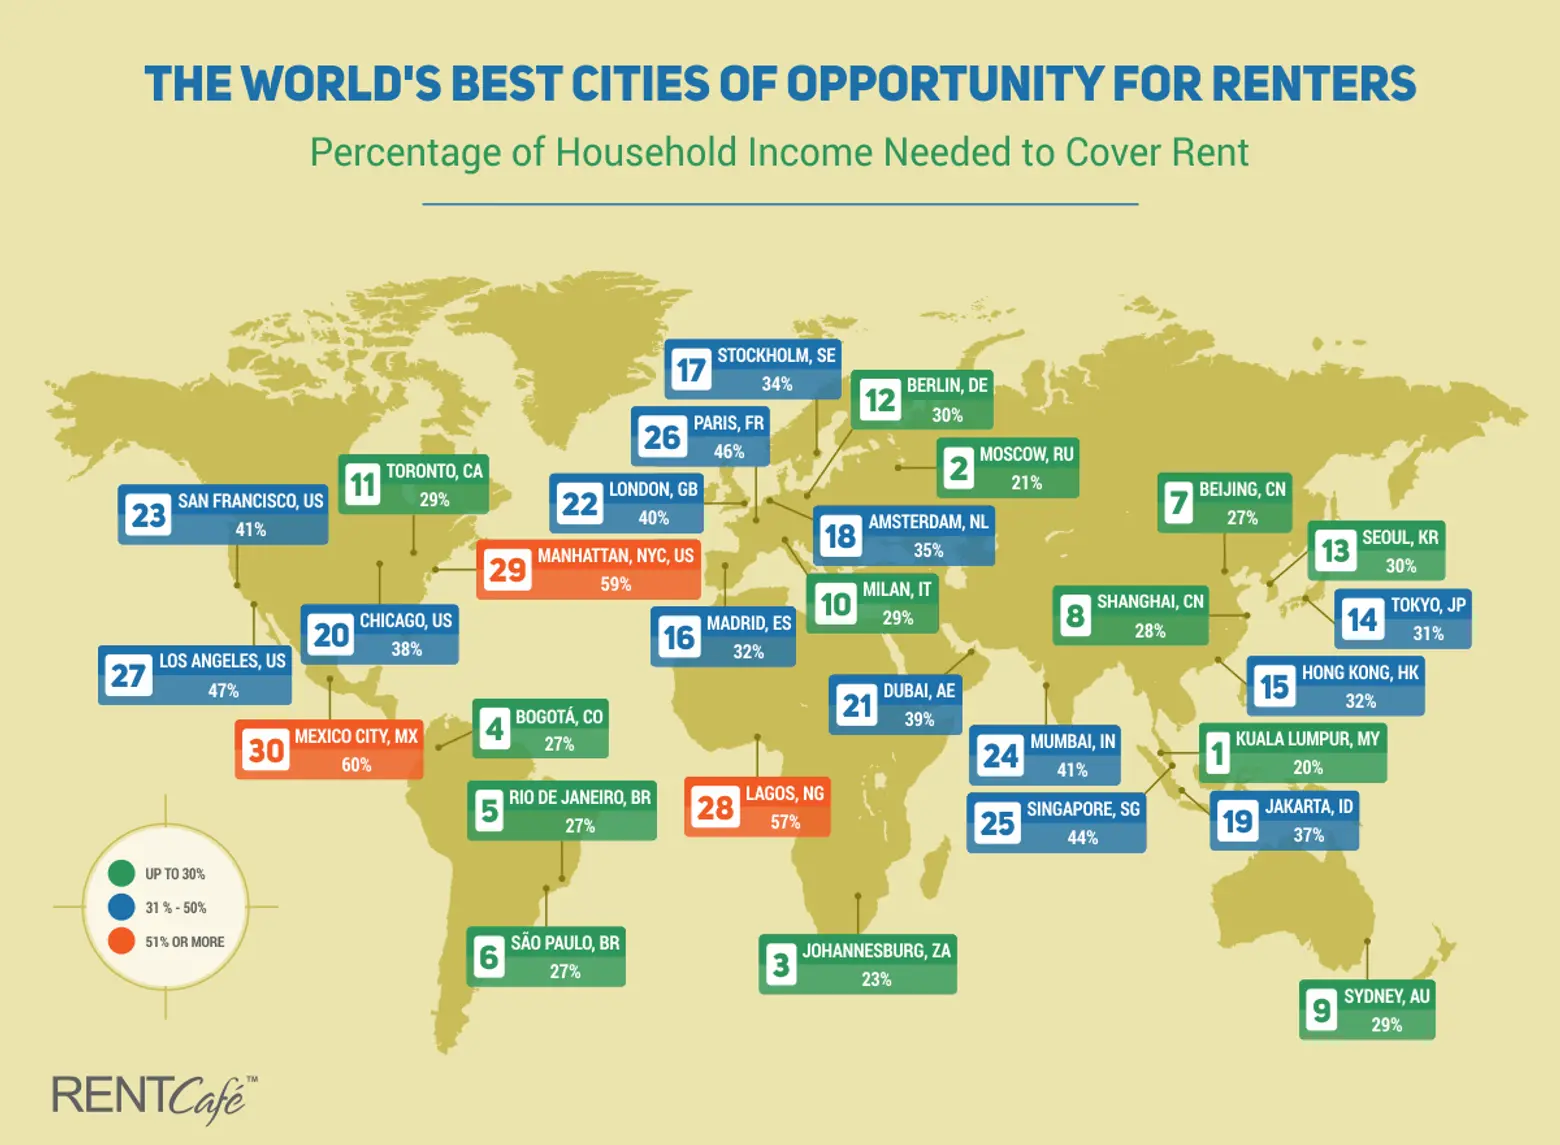 New study says Mexico City is less affordable for renters than Manhattan